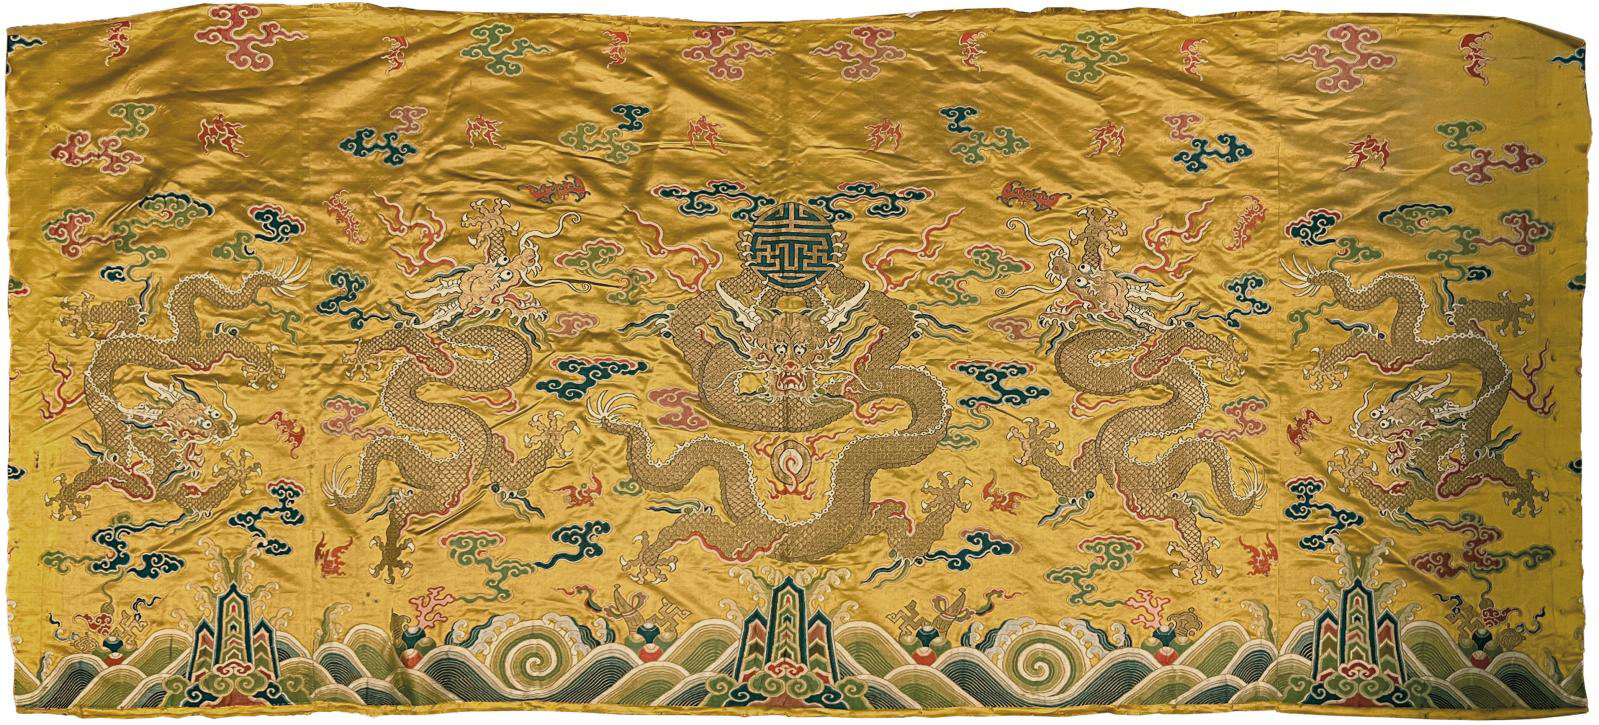 Silk Road Luxuries from China - Asian Art Newspaper